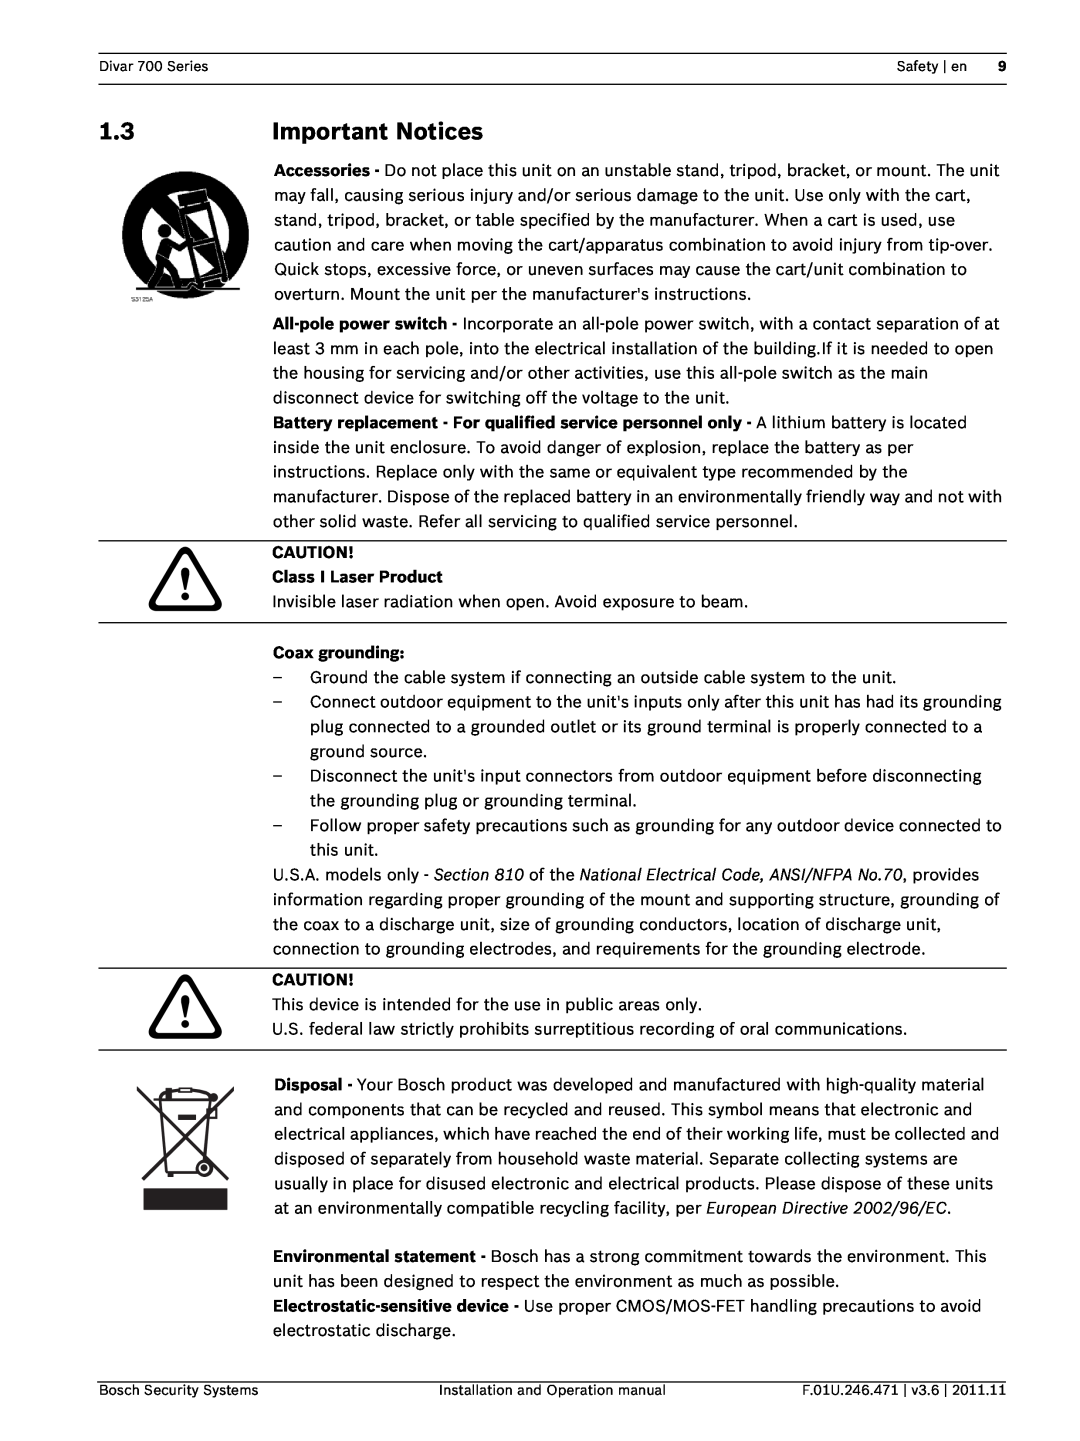 Bosch Appliances 700 operation manual Important Notices, Class I Laser Product, Coax grounding 